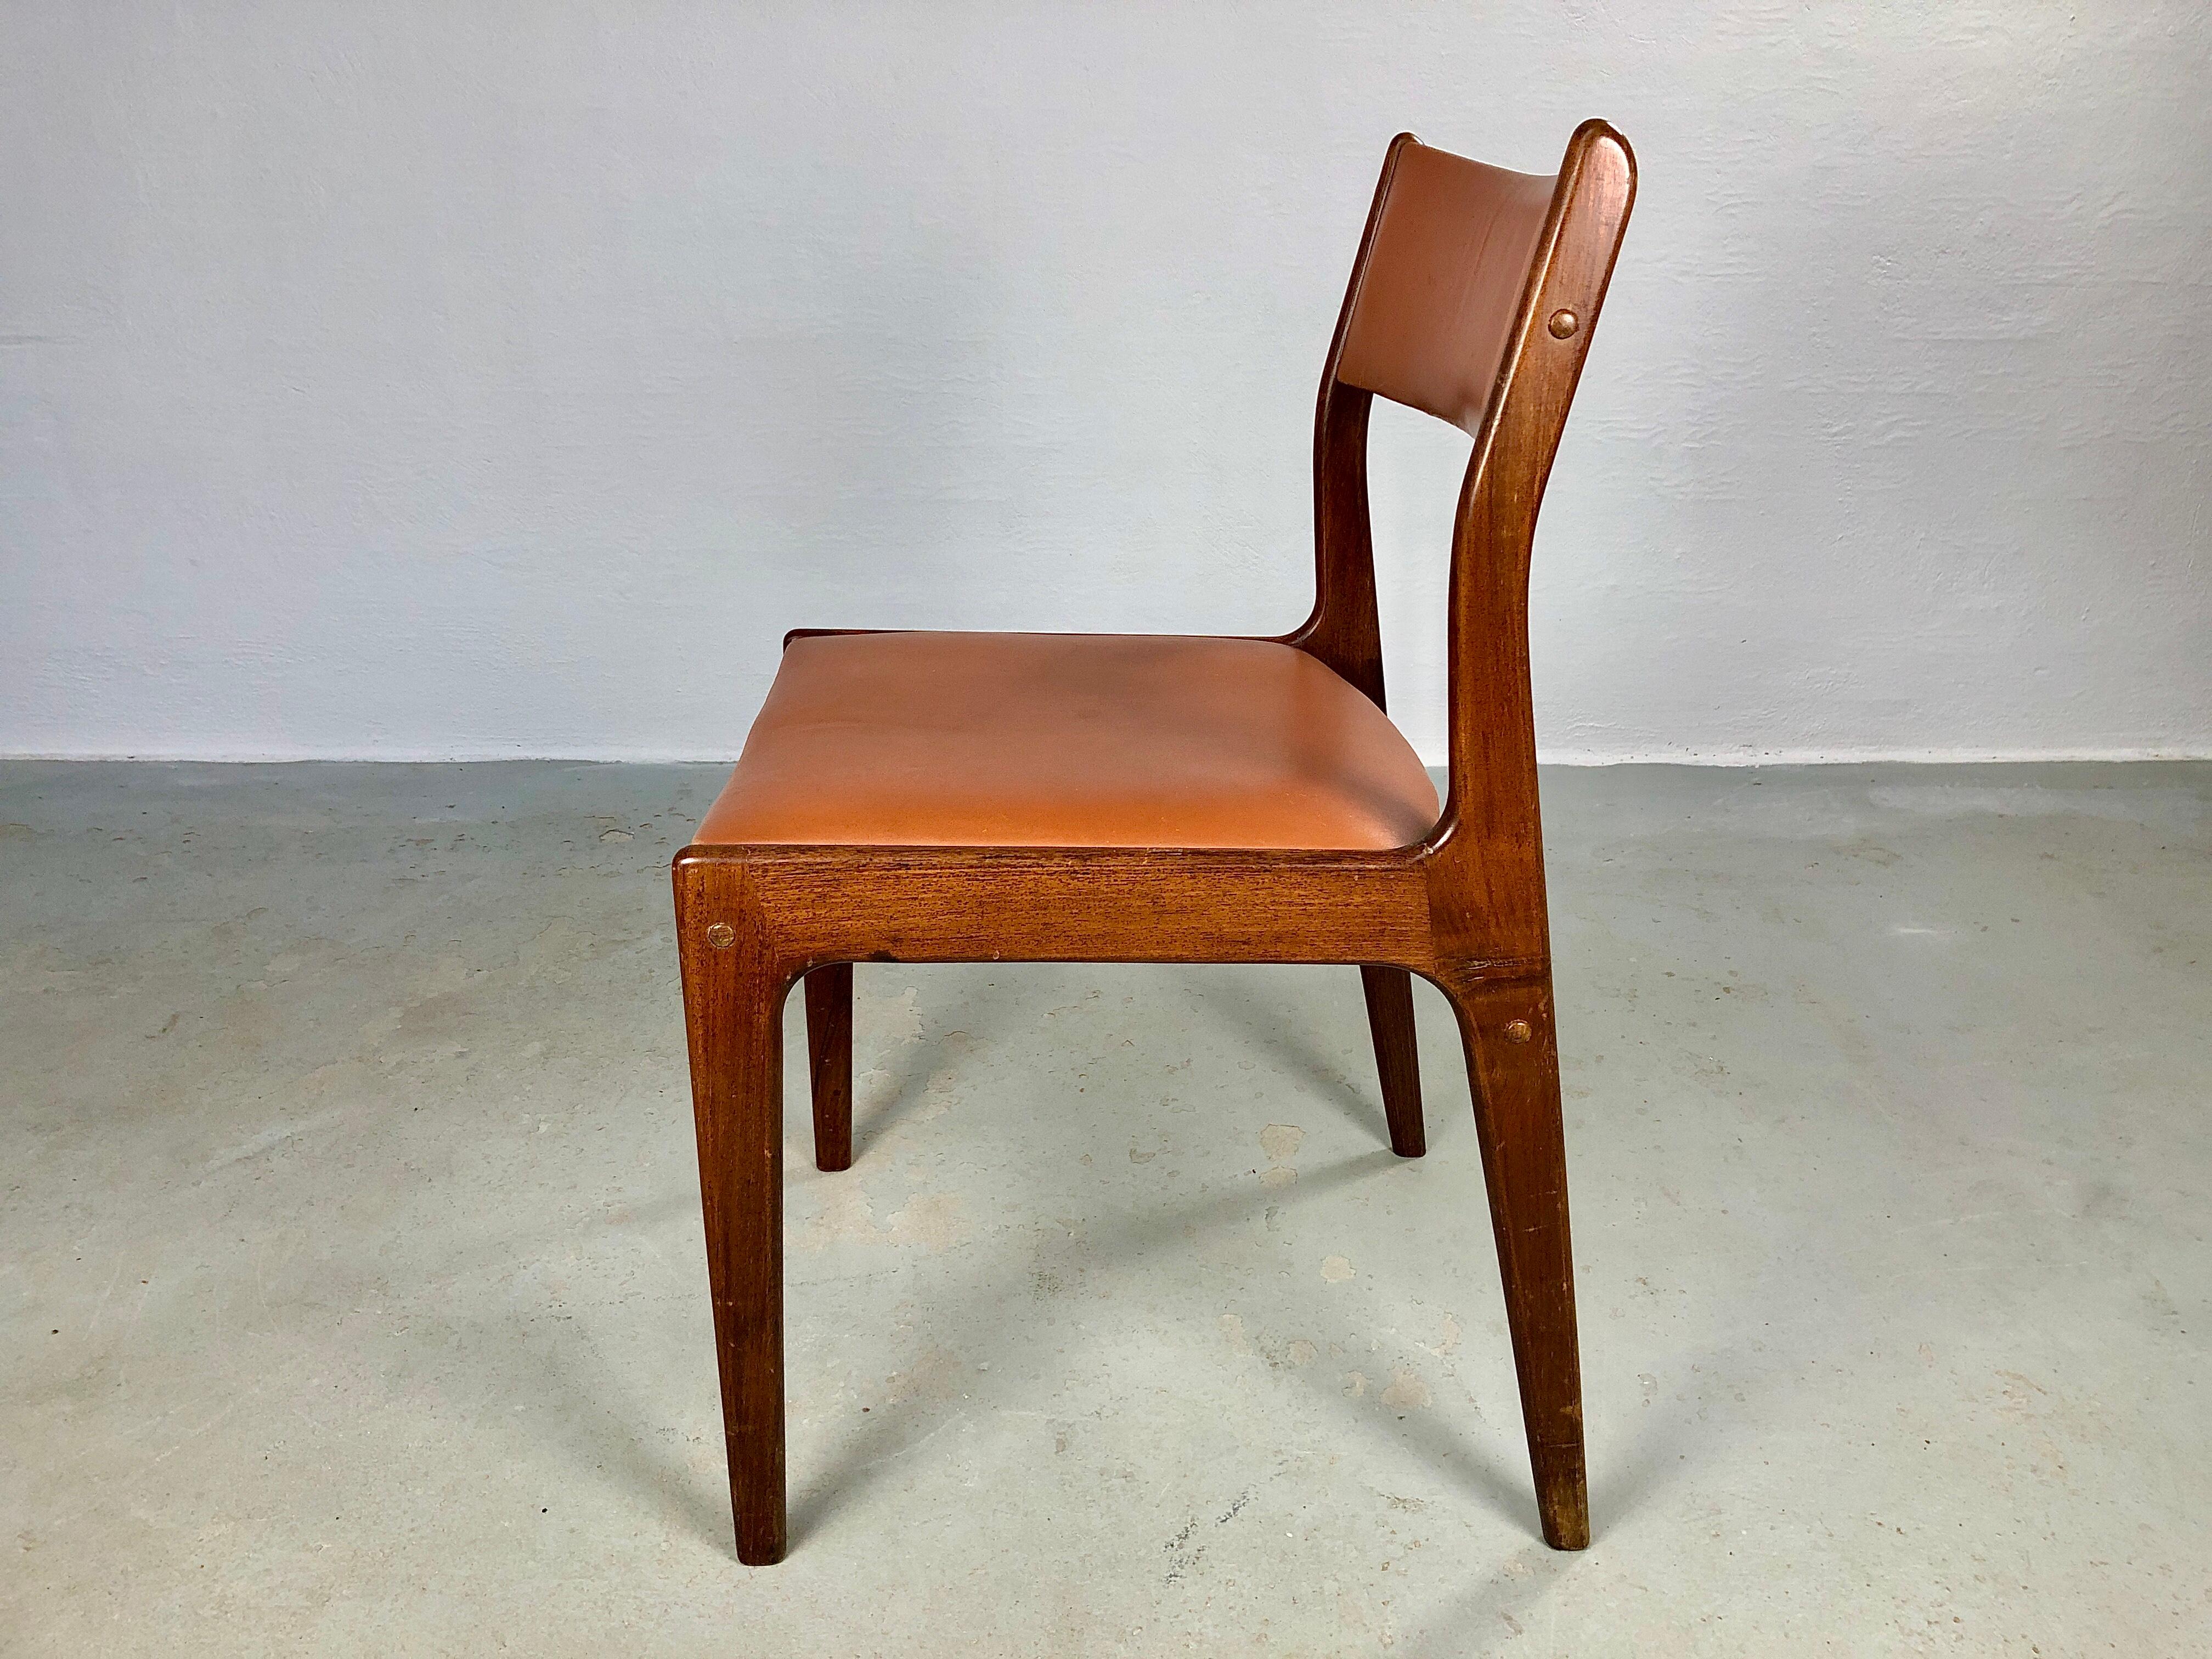 Restored Johannes Andersen Rosewood Dining Chairs Custom Reupholstey Included In Good Condition For Sale In Knebel, DK